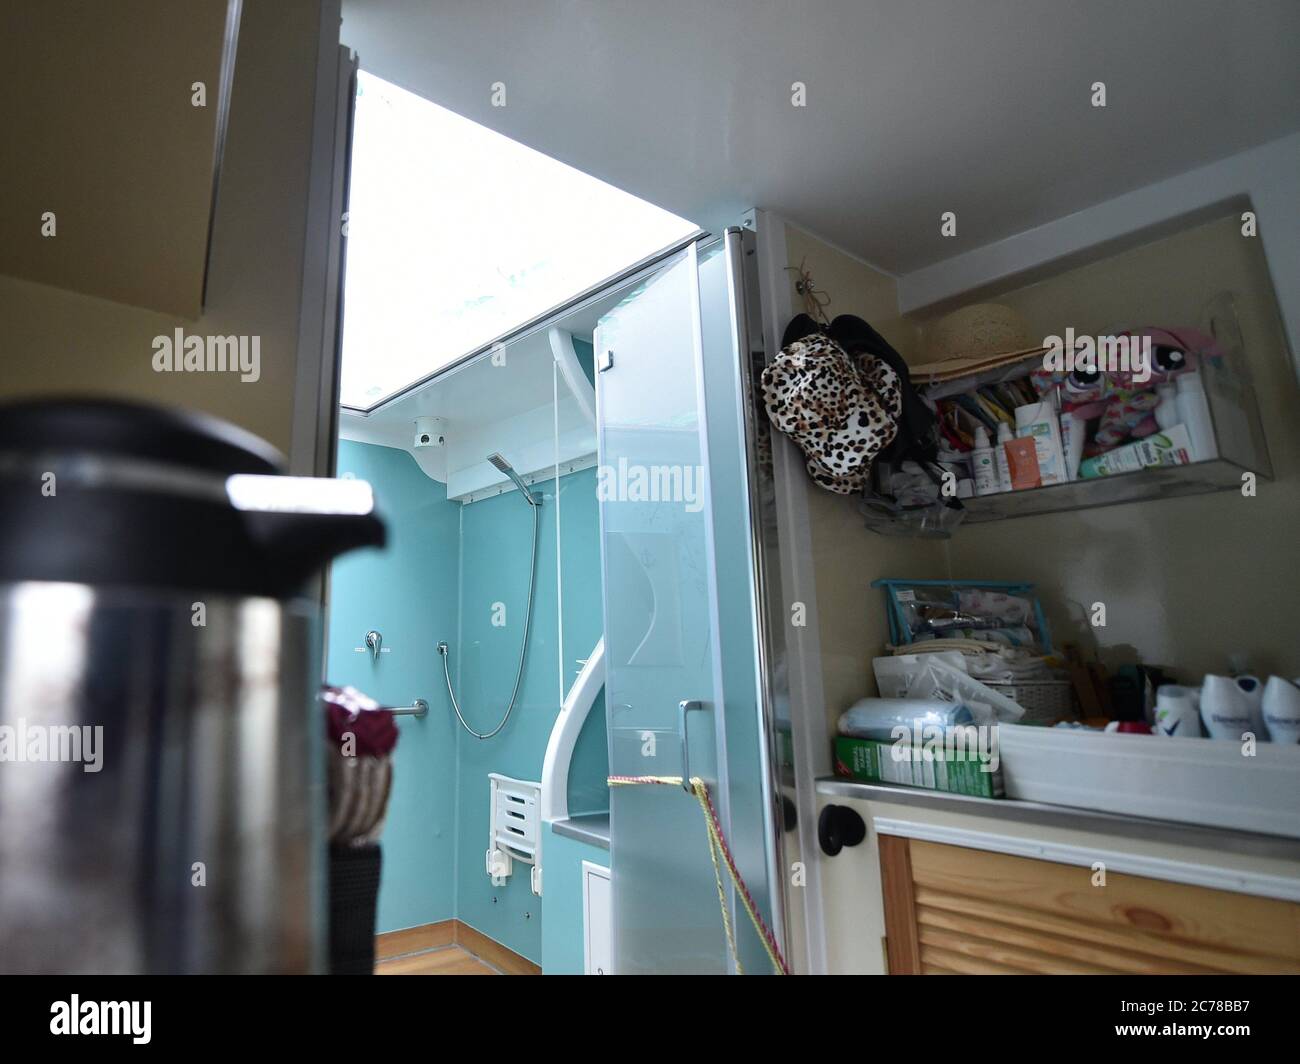 Berlin, Germany. 15th July, 2020. Coffee, snacks and toiletries are available inside the shower mobile for homeless women operated by the Sozialdienst katholischer Frauen e.V. Credit: Sven Braun/dpa/Alamy Live News Stock Photo